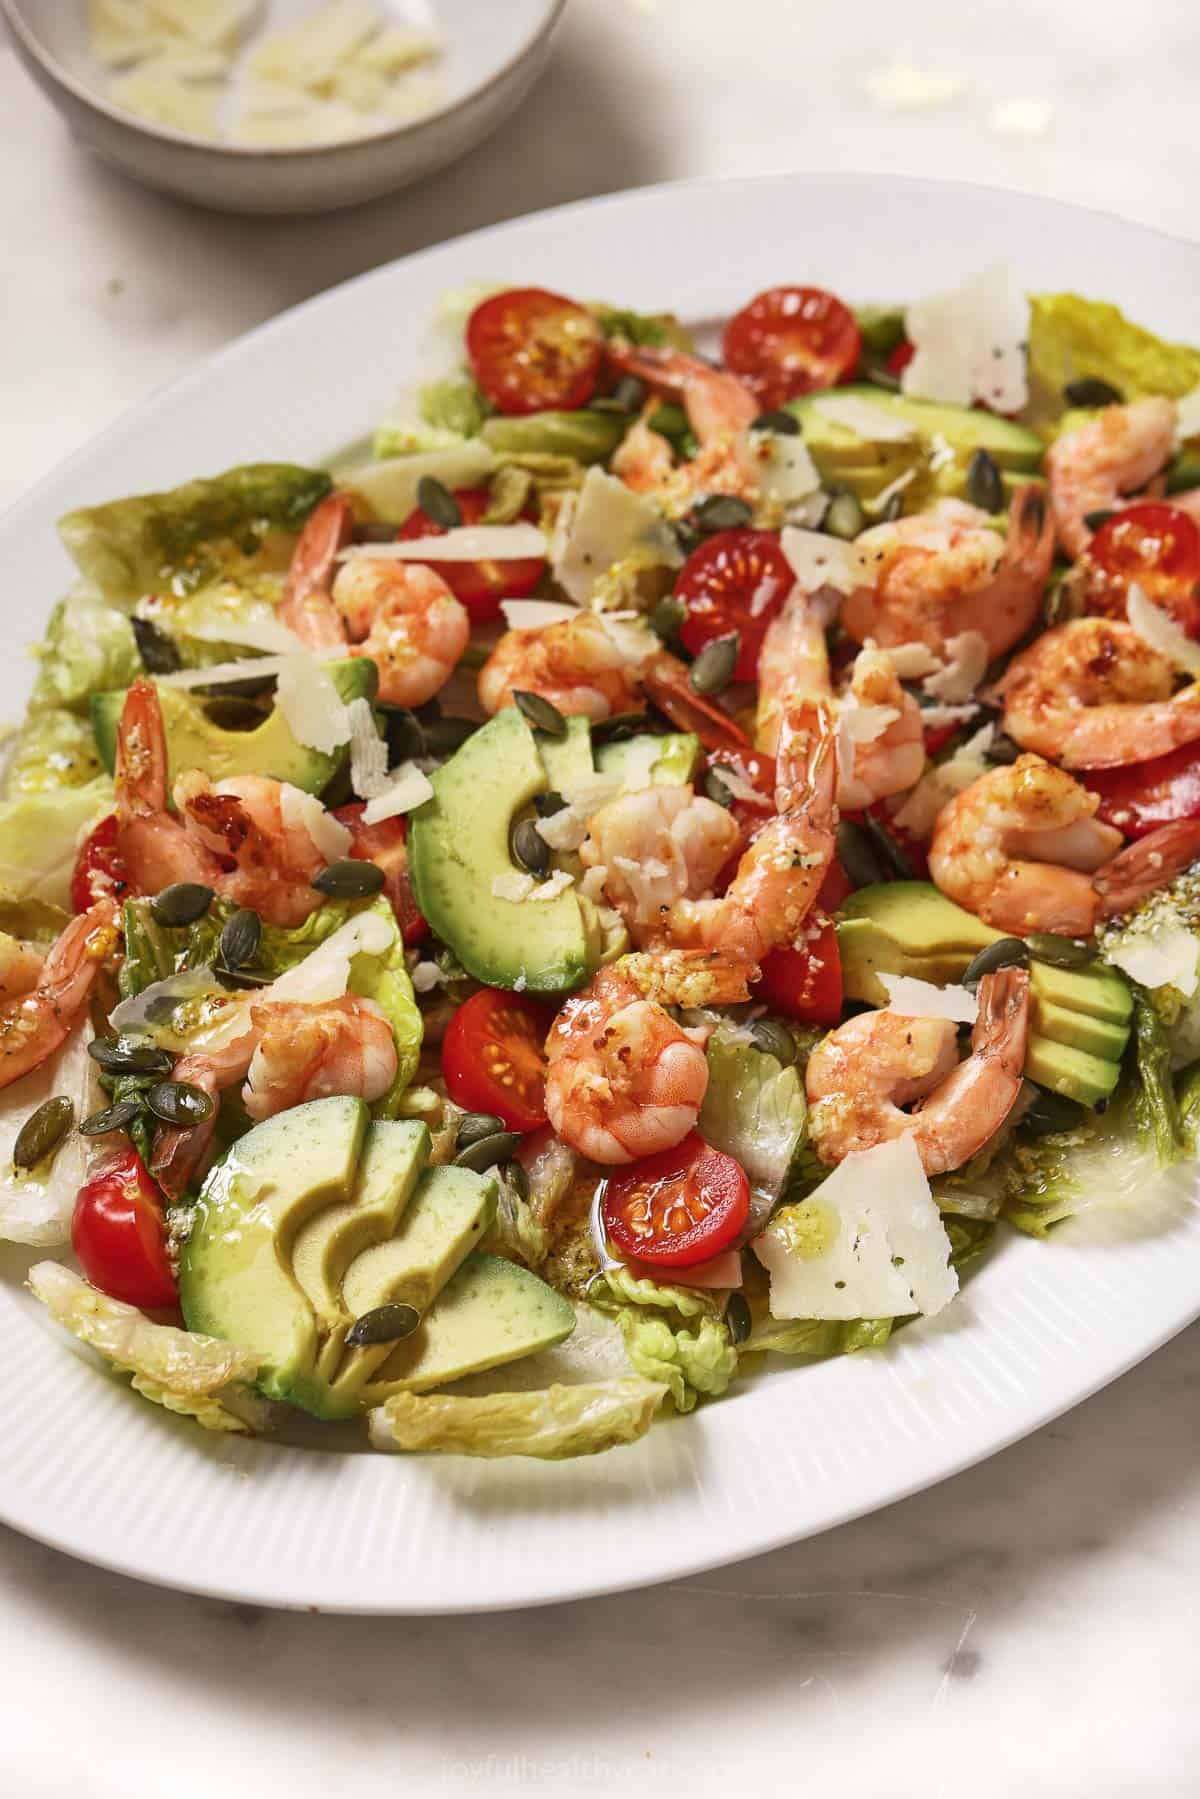 Shrimp caesar salad with grilled lettuce, avocado, tomatoes, and homemade dressing. 